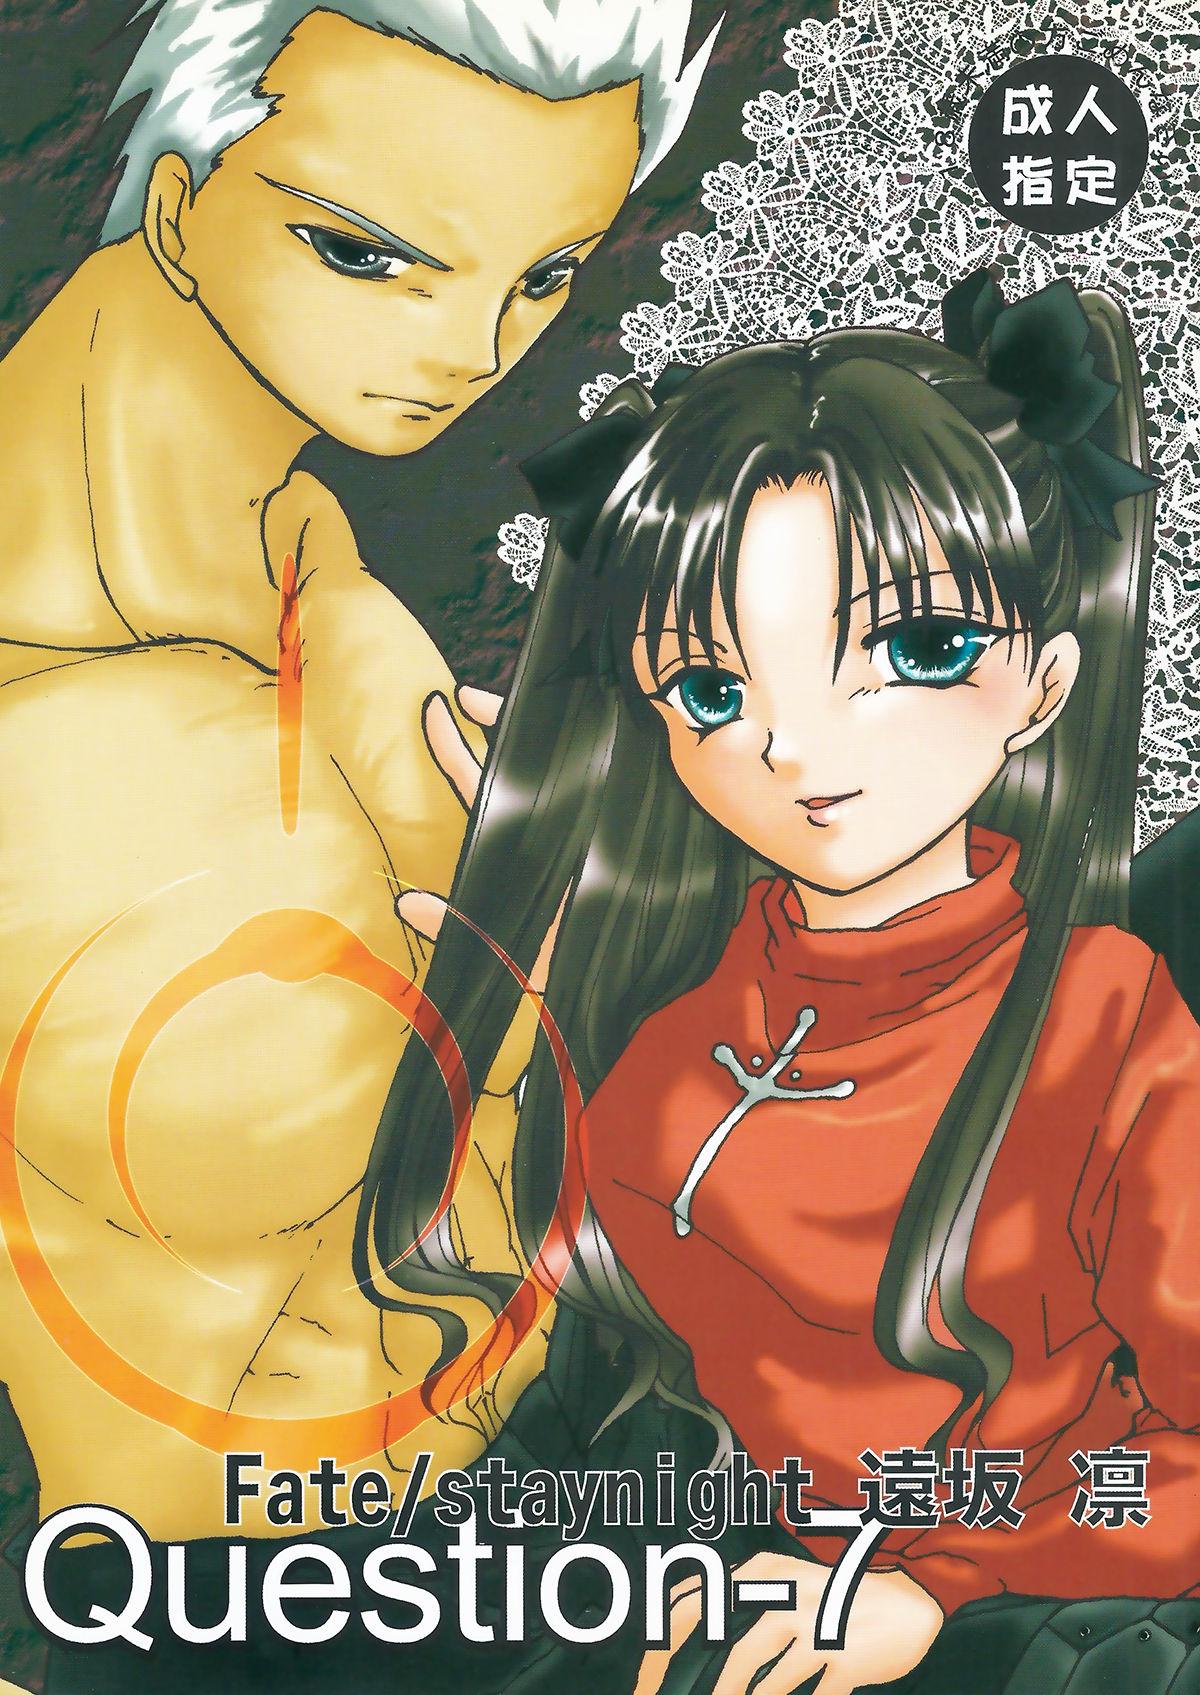 Pendeja Question-7 - Fate stay night Gays - Picture 1